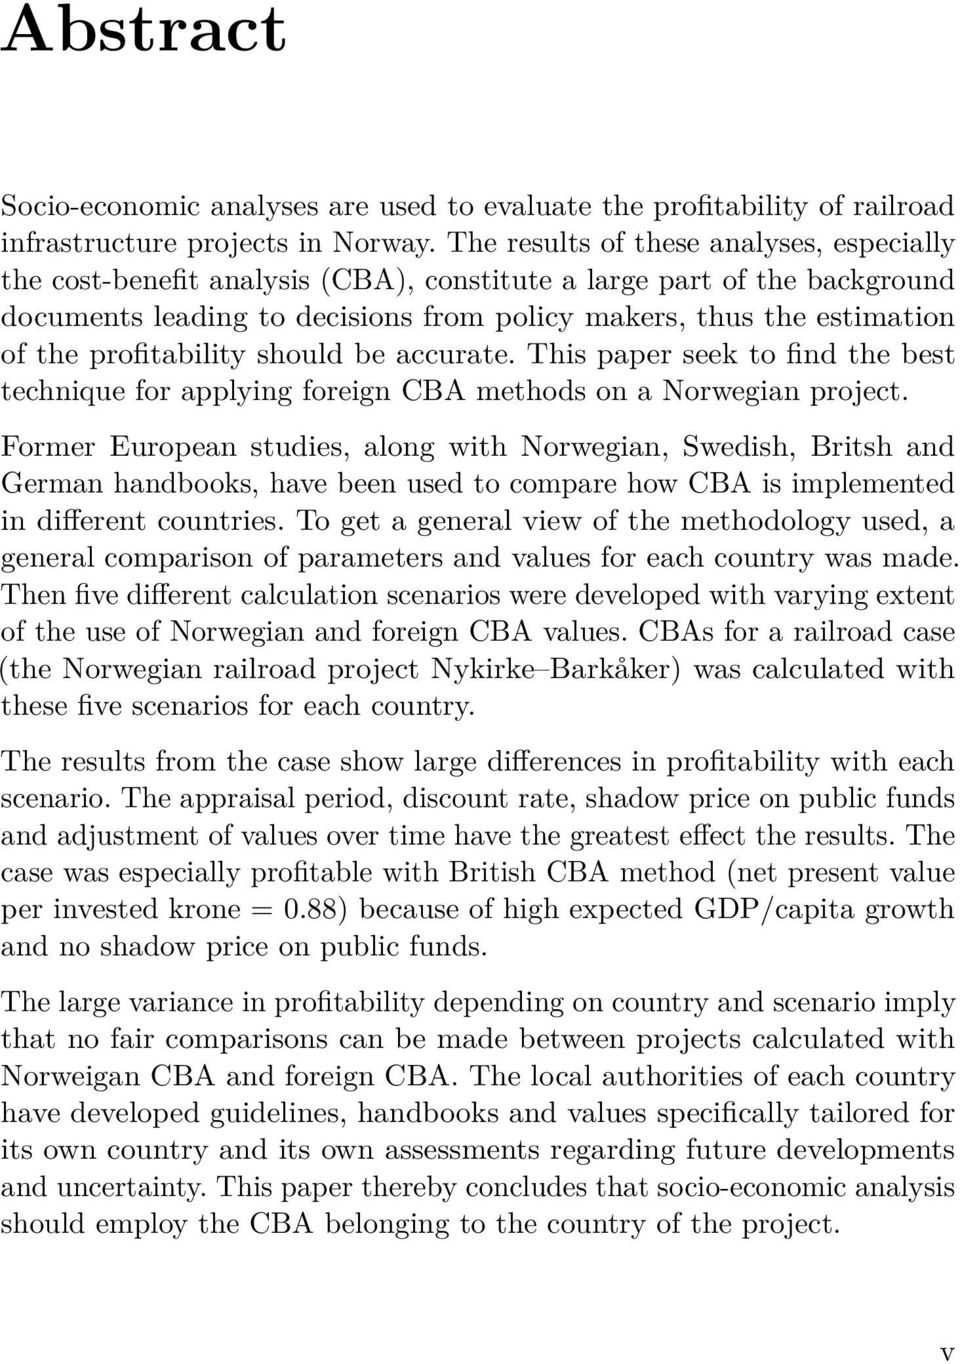 profitability should be accurate. This paper seek to find the best technique for applying foreign CBA methods on a Norwegian project.